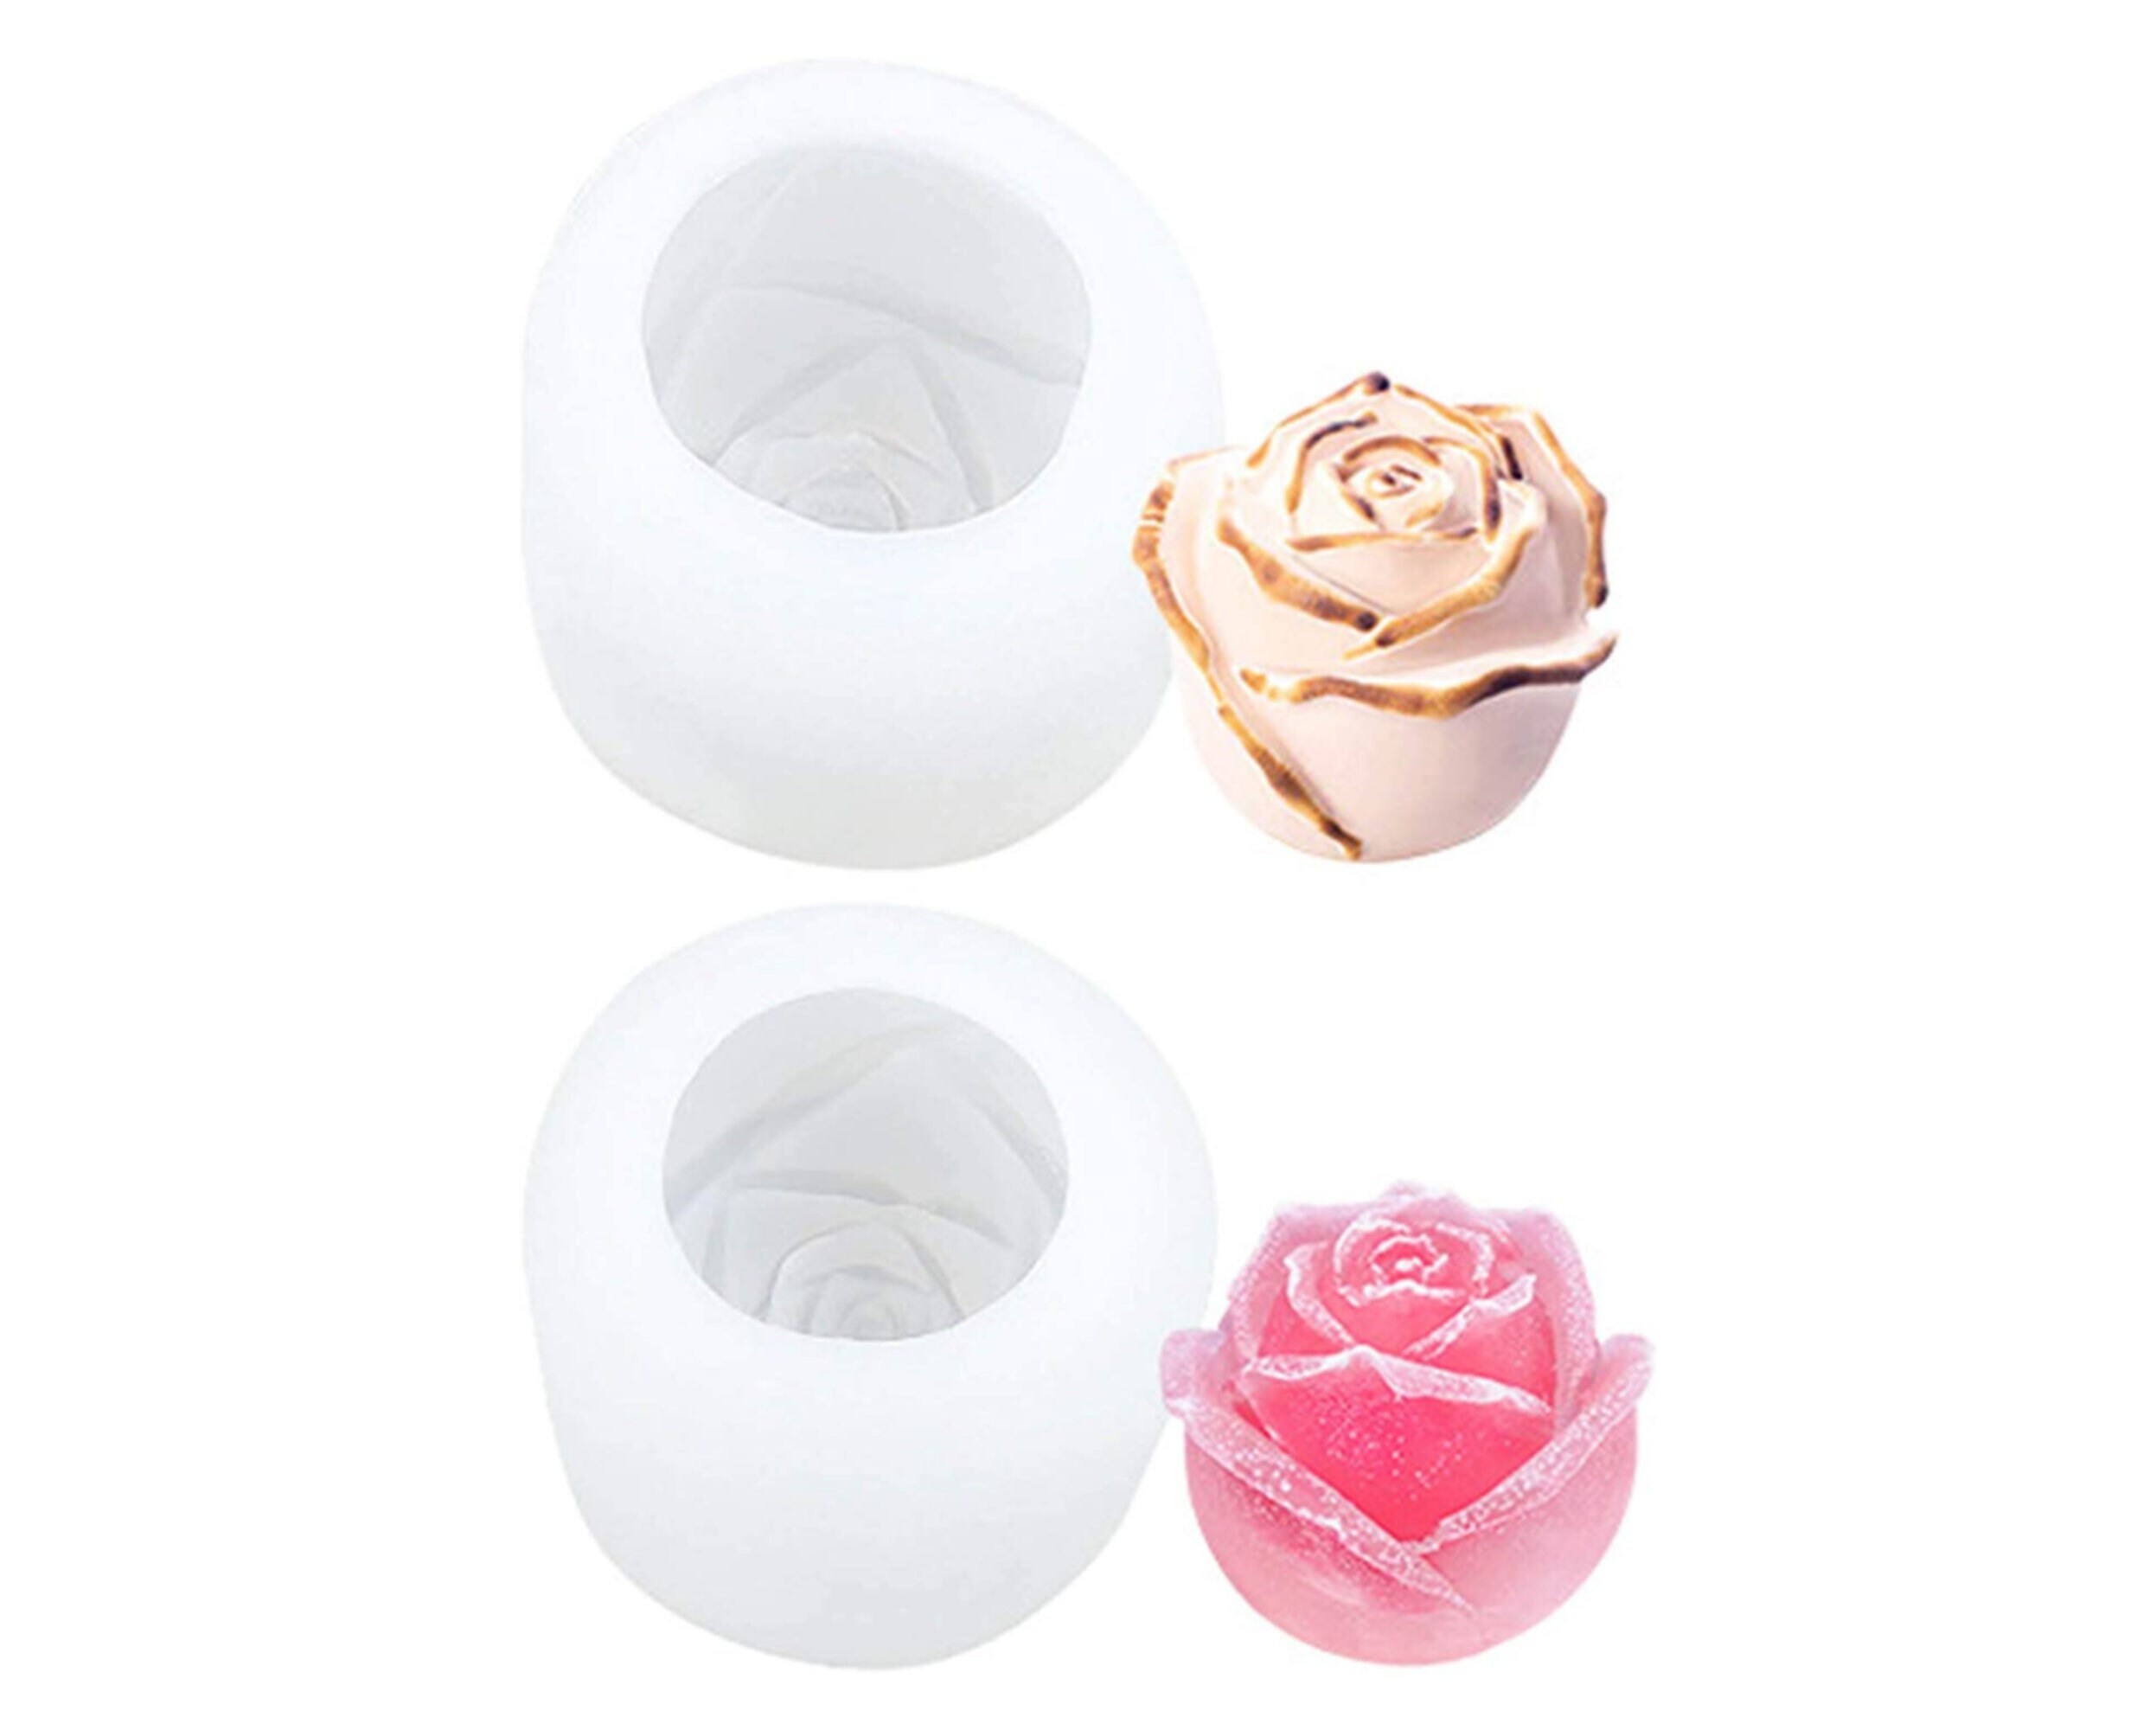 2 Pieces 6-cavity Silicone Flowers Shaped Molds Silicone Rose Flower Shaped  Baking Molds Non Stick Silicone Jumbo Rose Molds